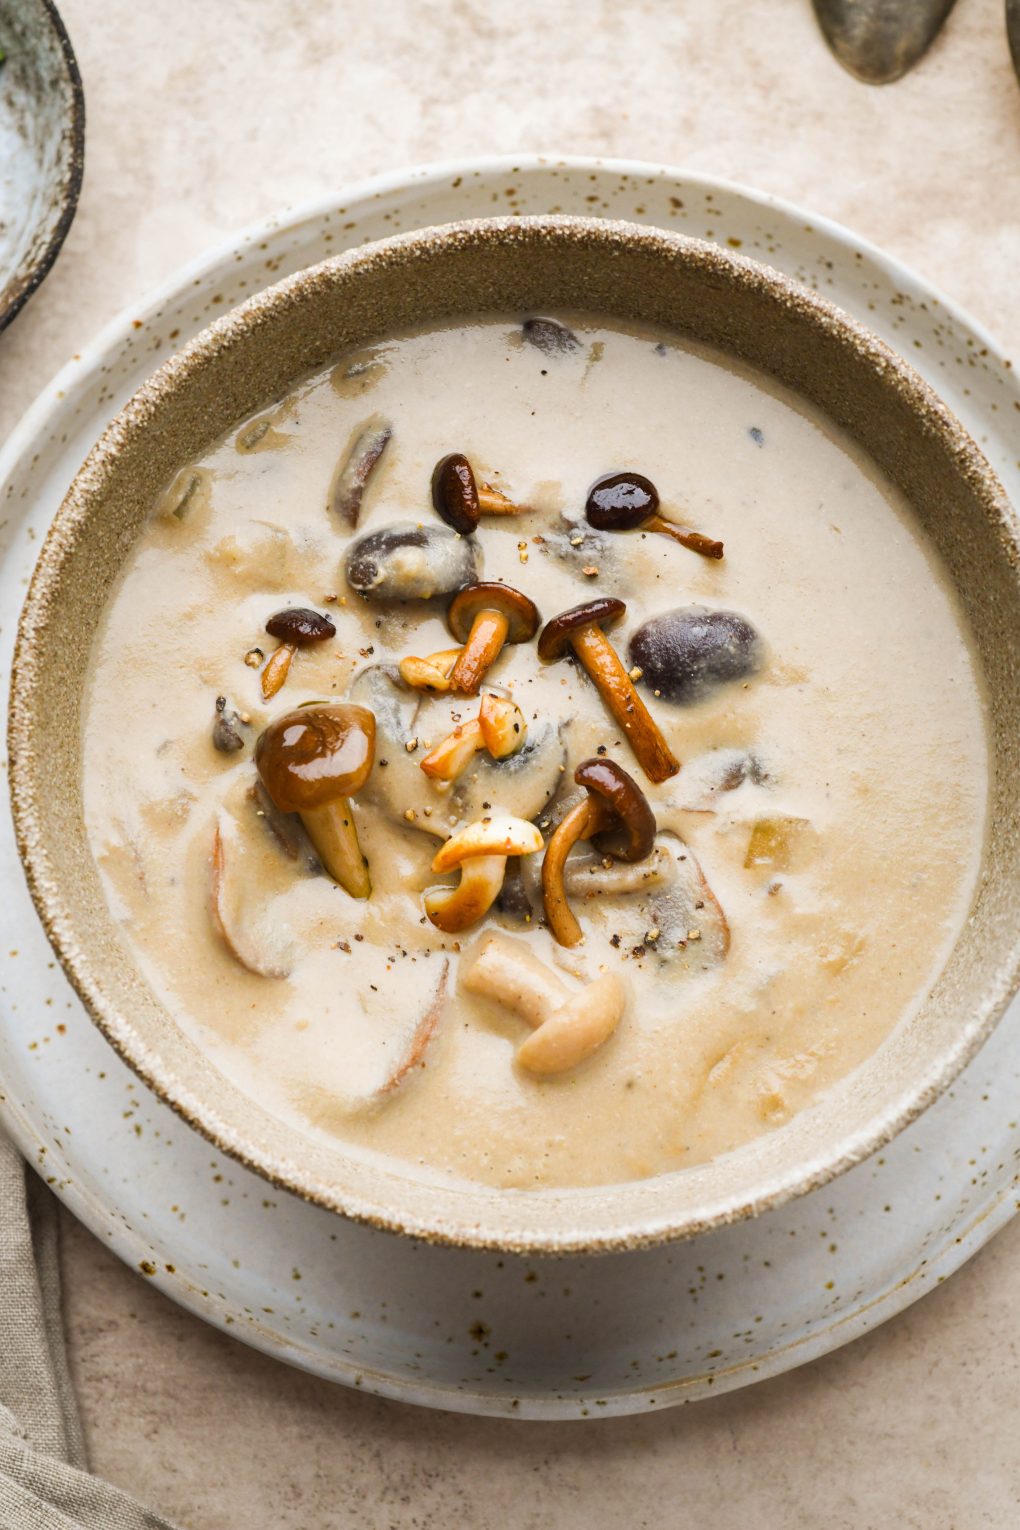 Super creamy homemade cream of mushroom soup in a rustic brown ceramic bowl. Topped with sautéed mushrooms.